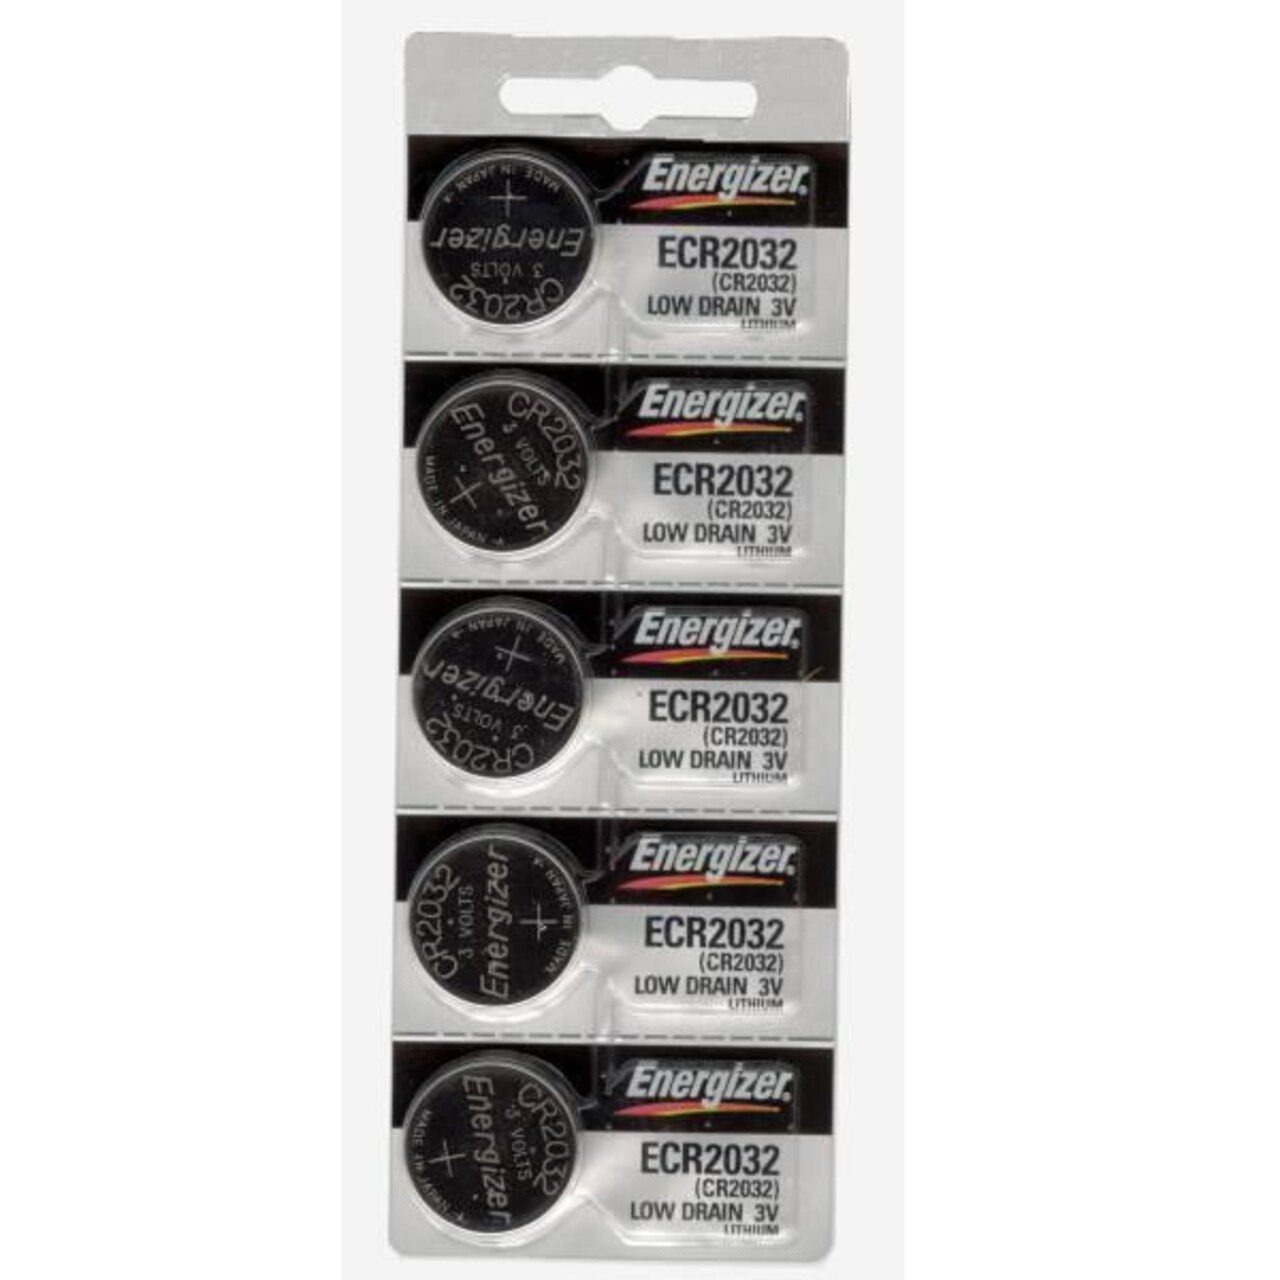 Energizer CR2032 Lithium Batteries (1 pack of 5)